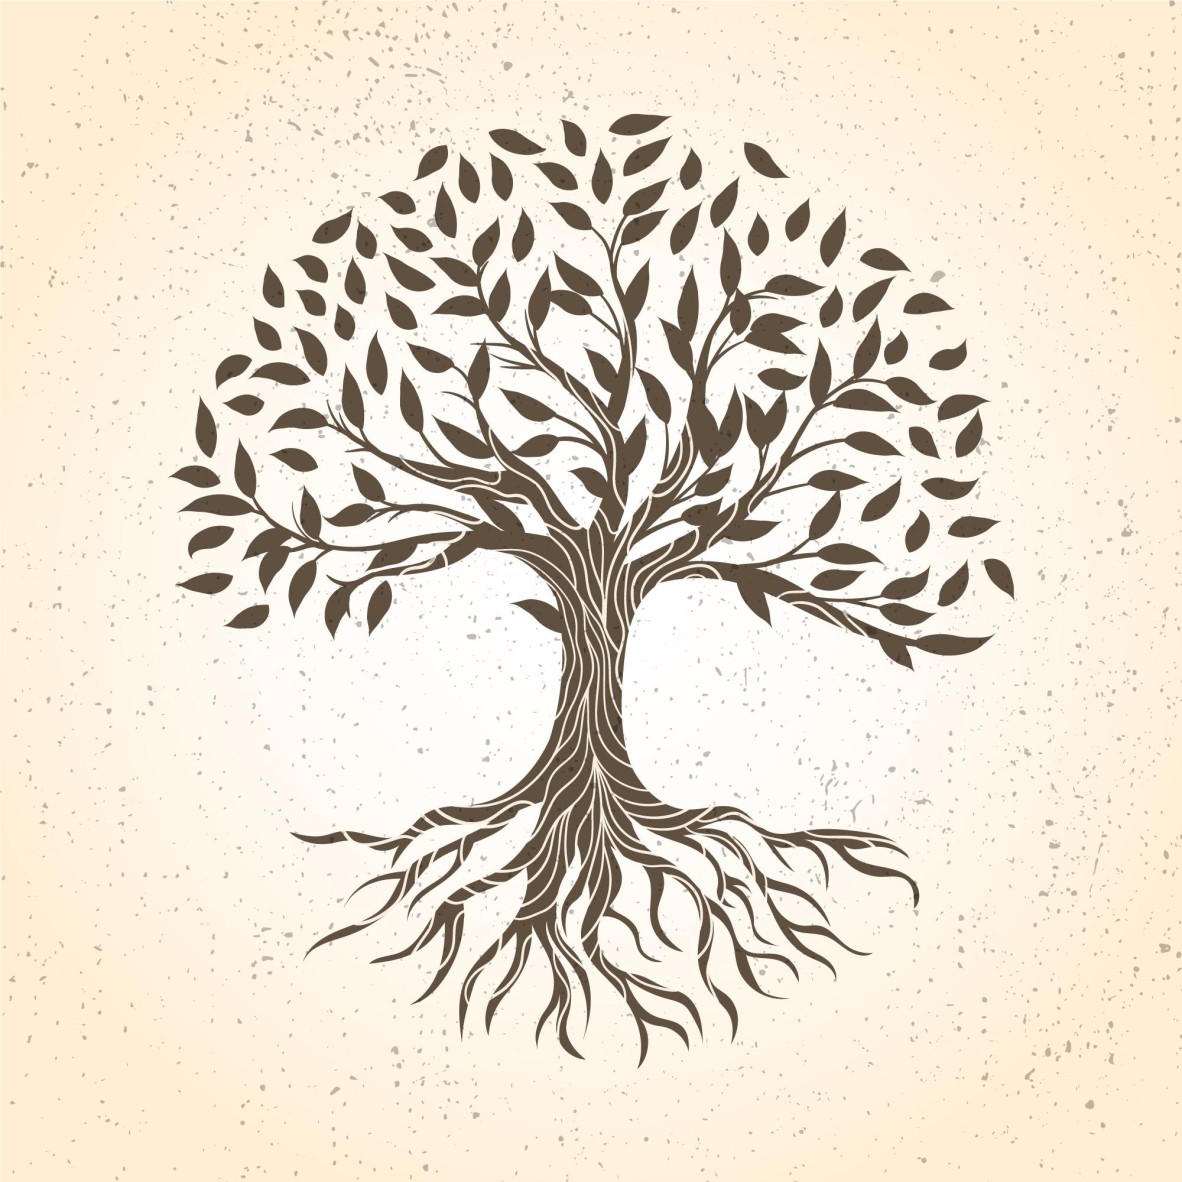 Hand drawn brown tree of life showing leaves, branches and roots.